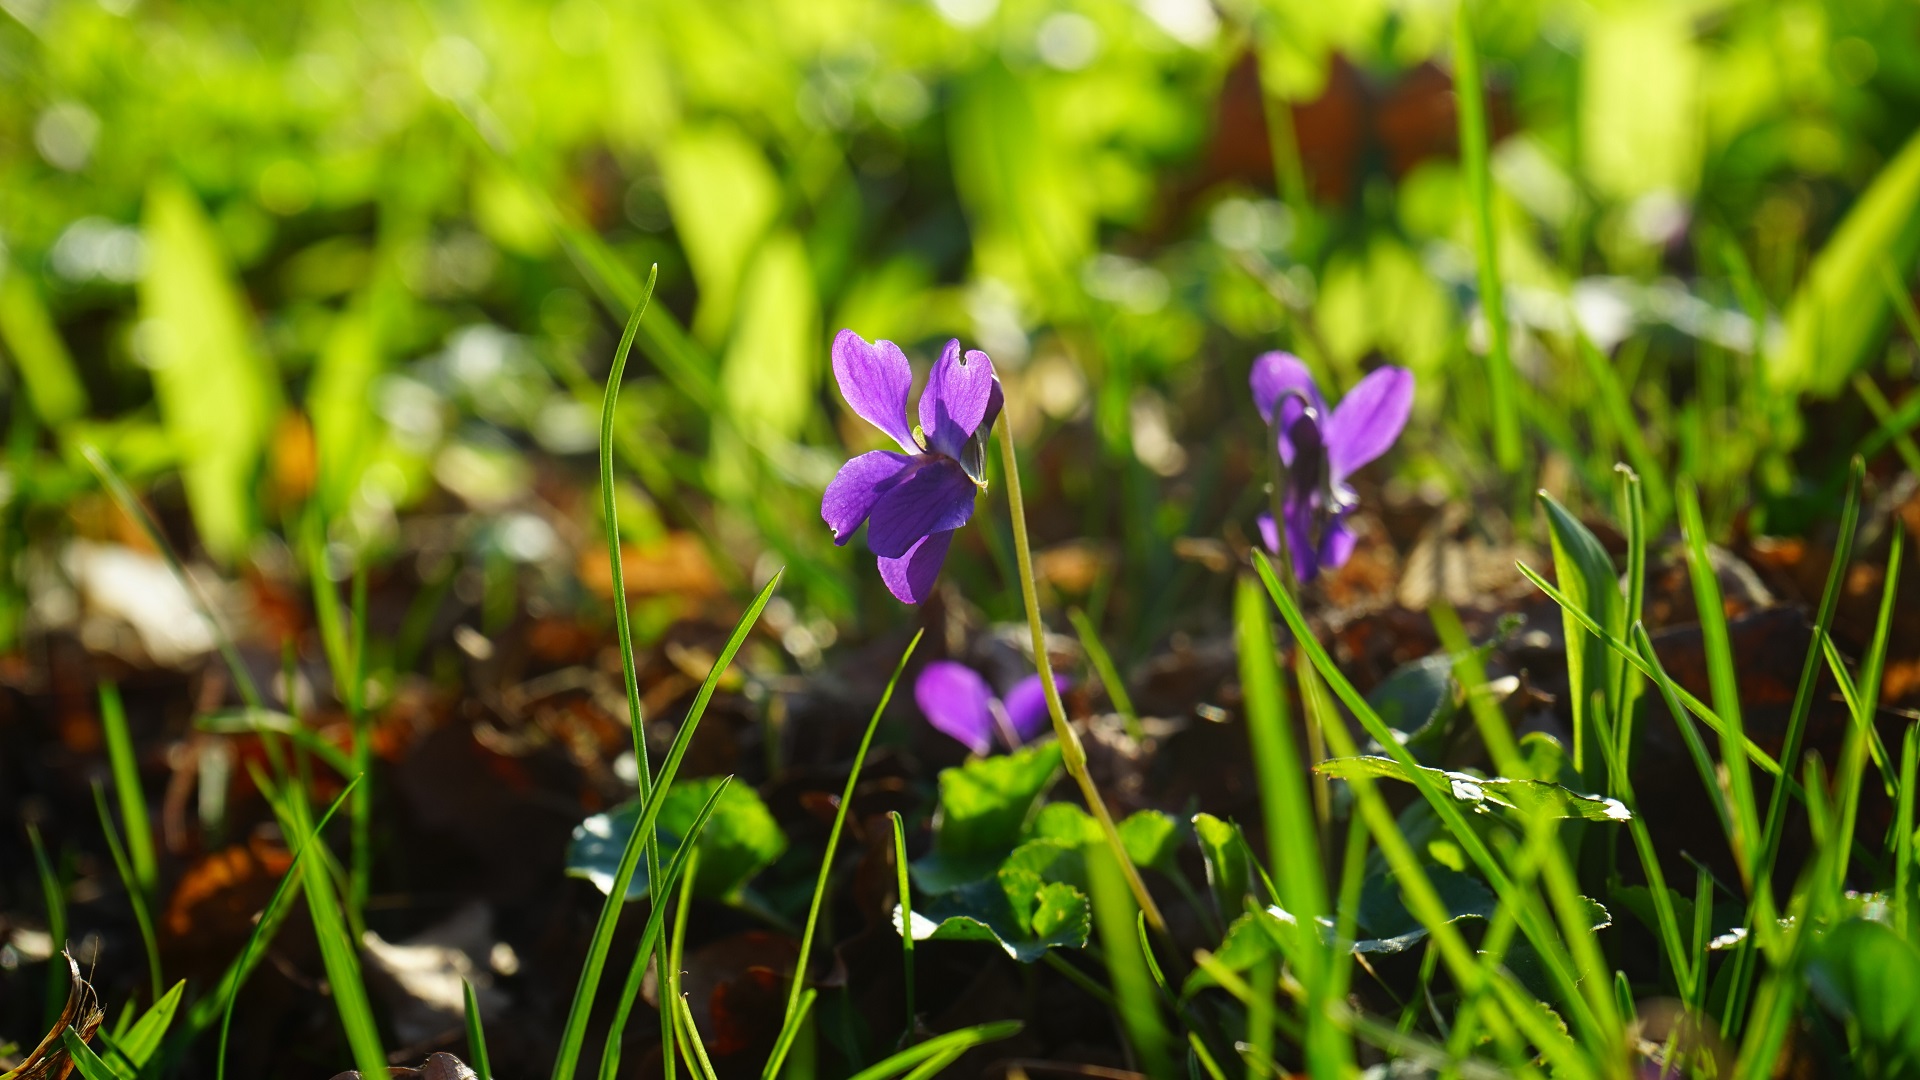 What Are Violets and How to Get Rid of Them